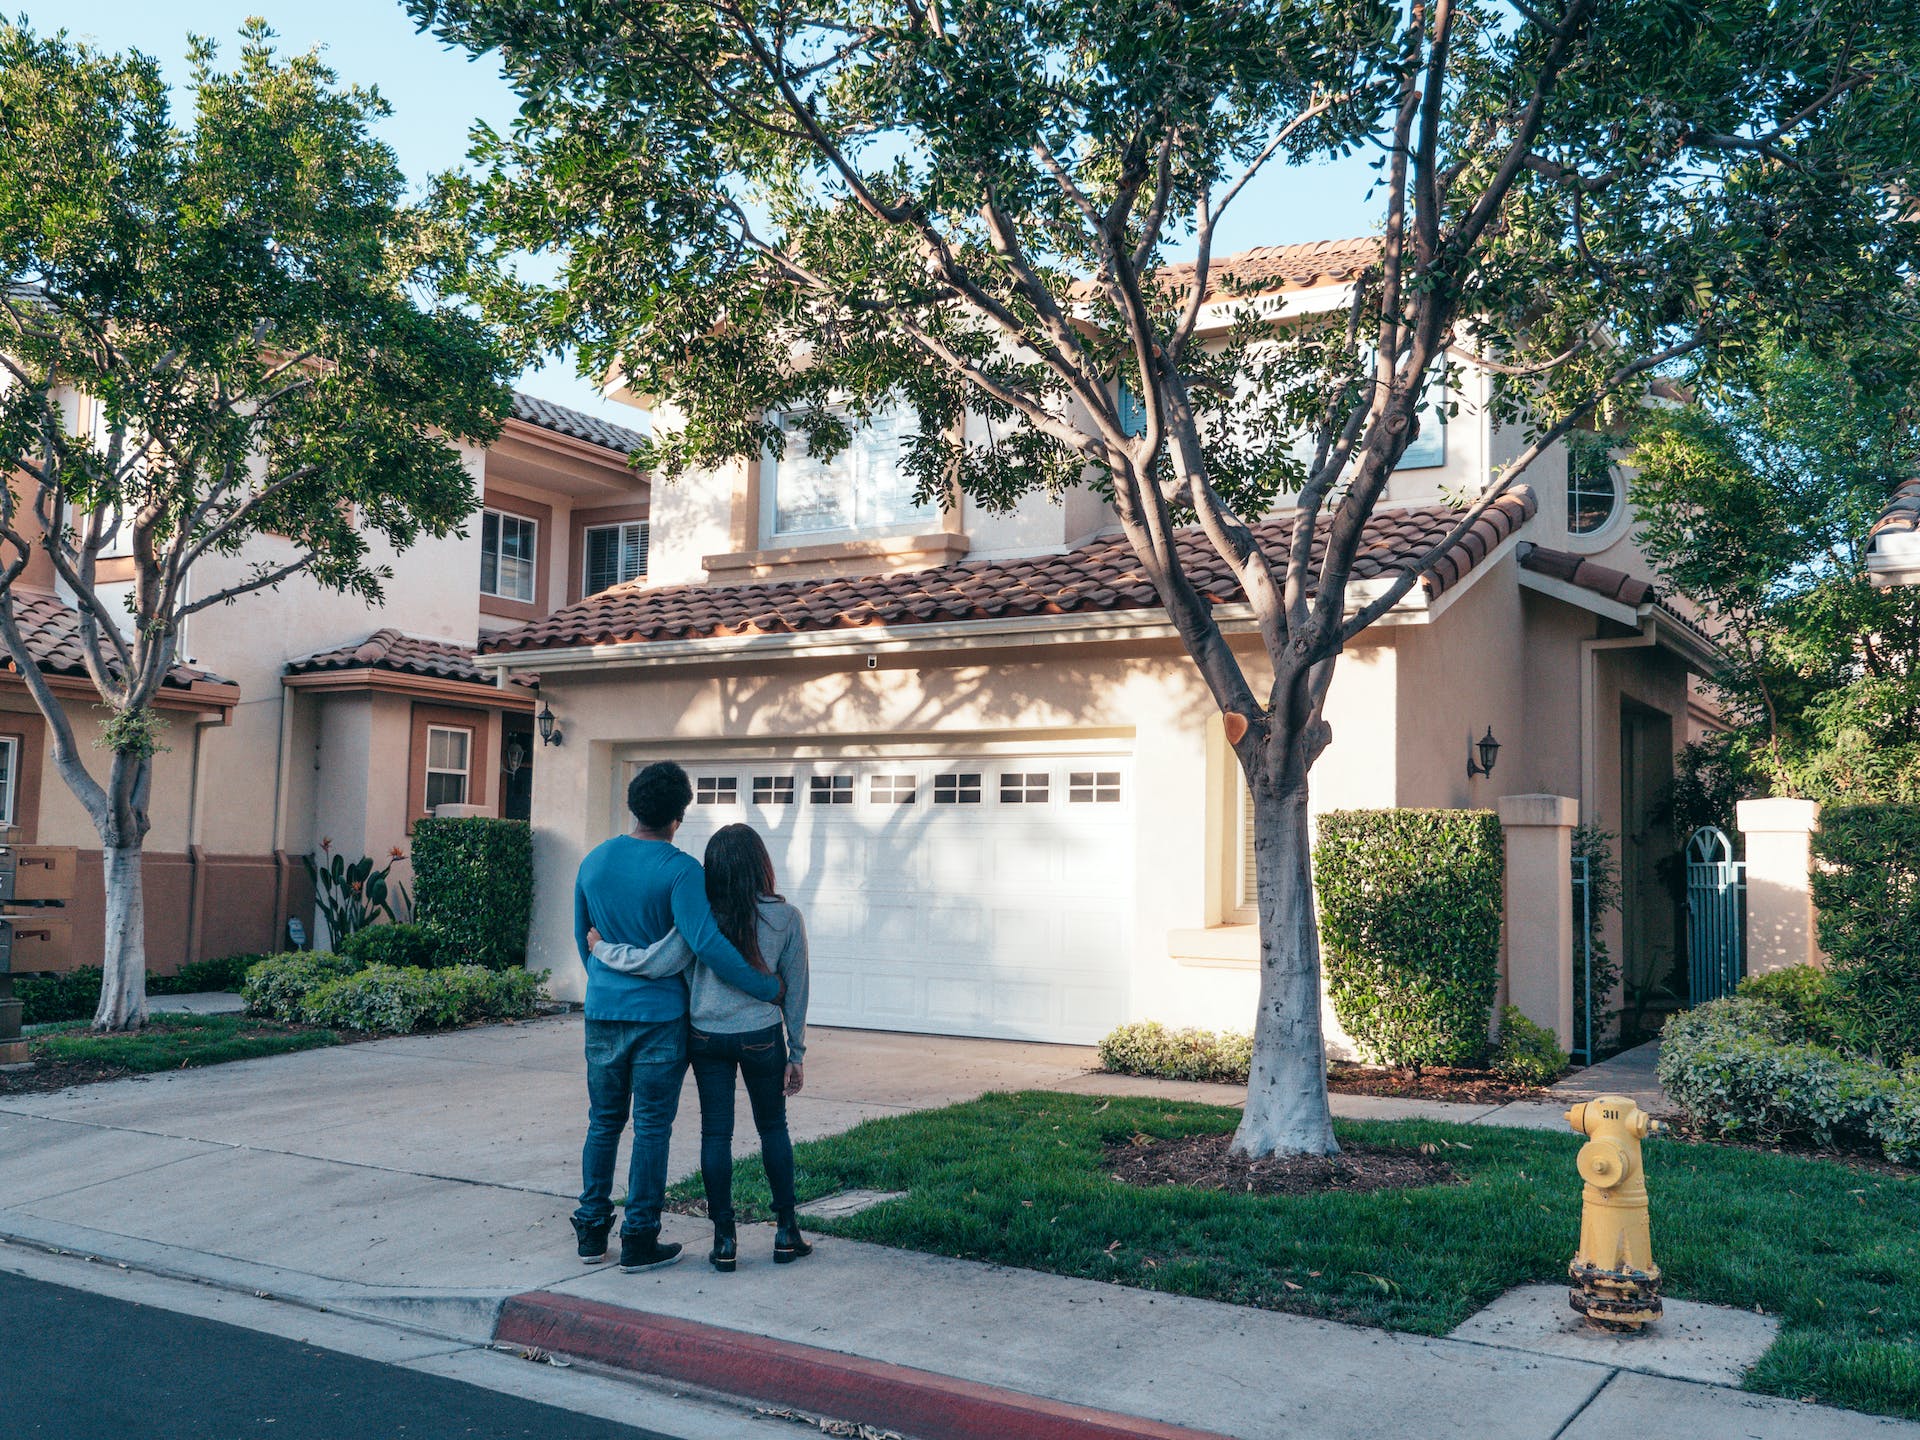 A couple standing in front of their new home | Source: Pexels